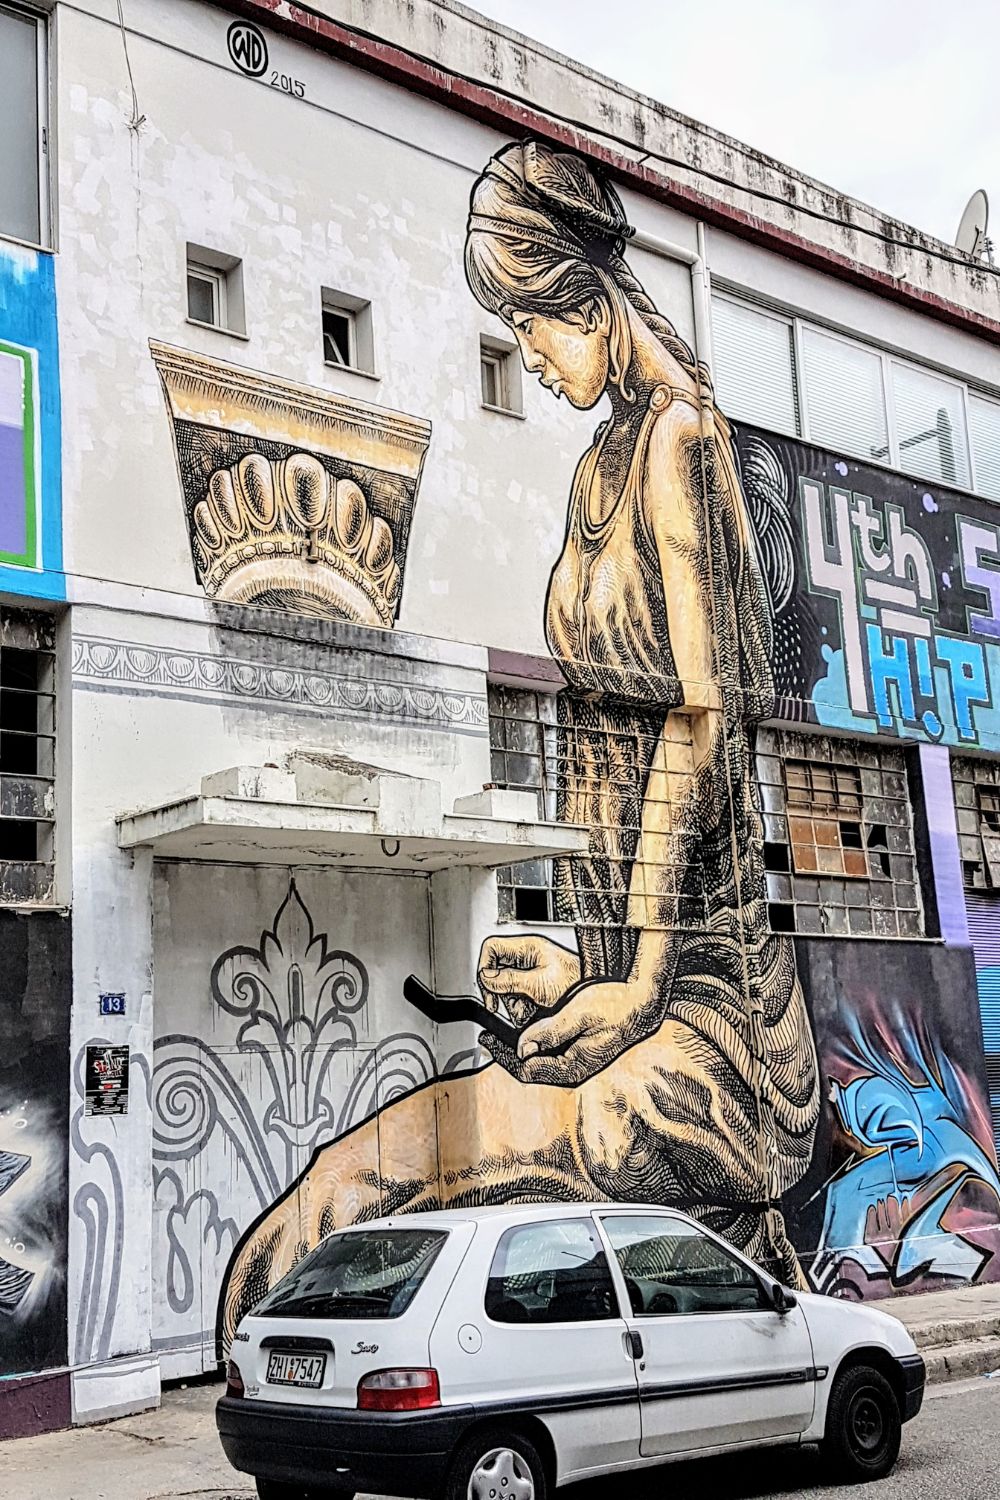 When you spend 4 days in Athens, you'll see some incredible street art